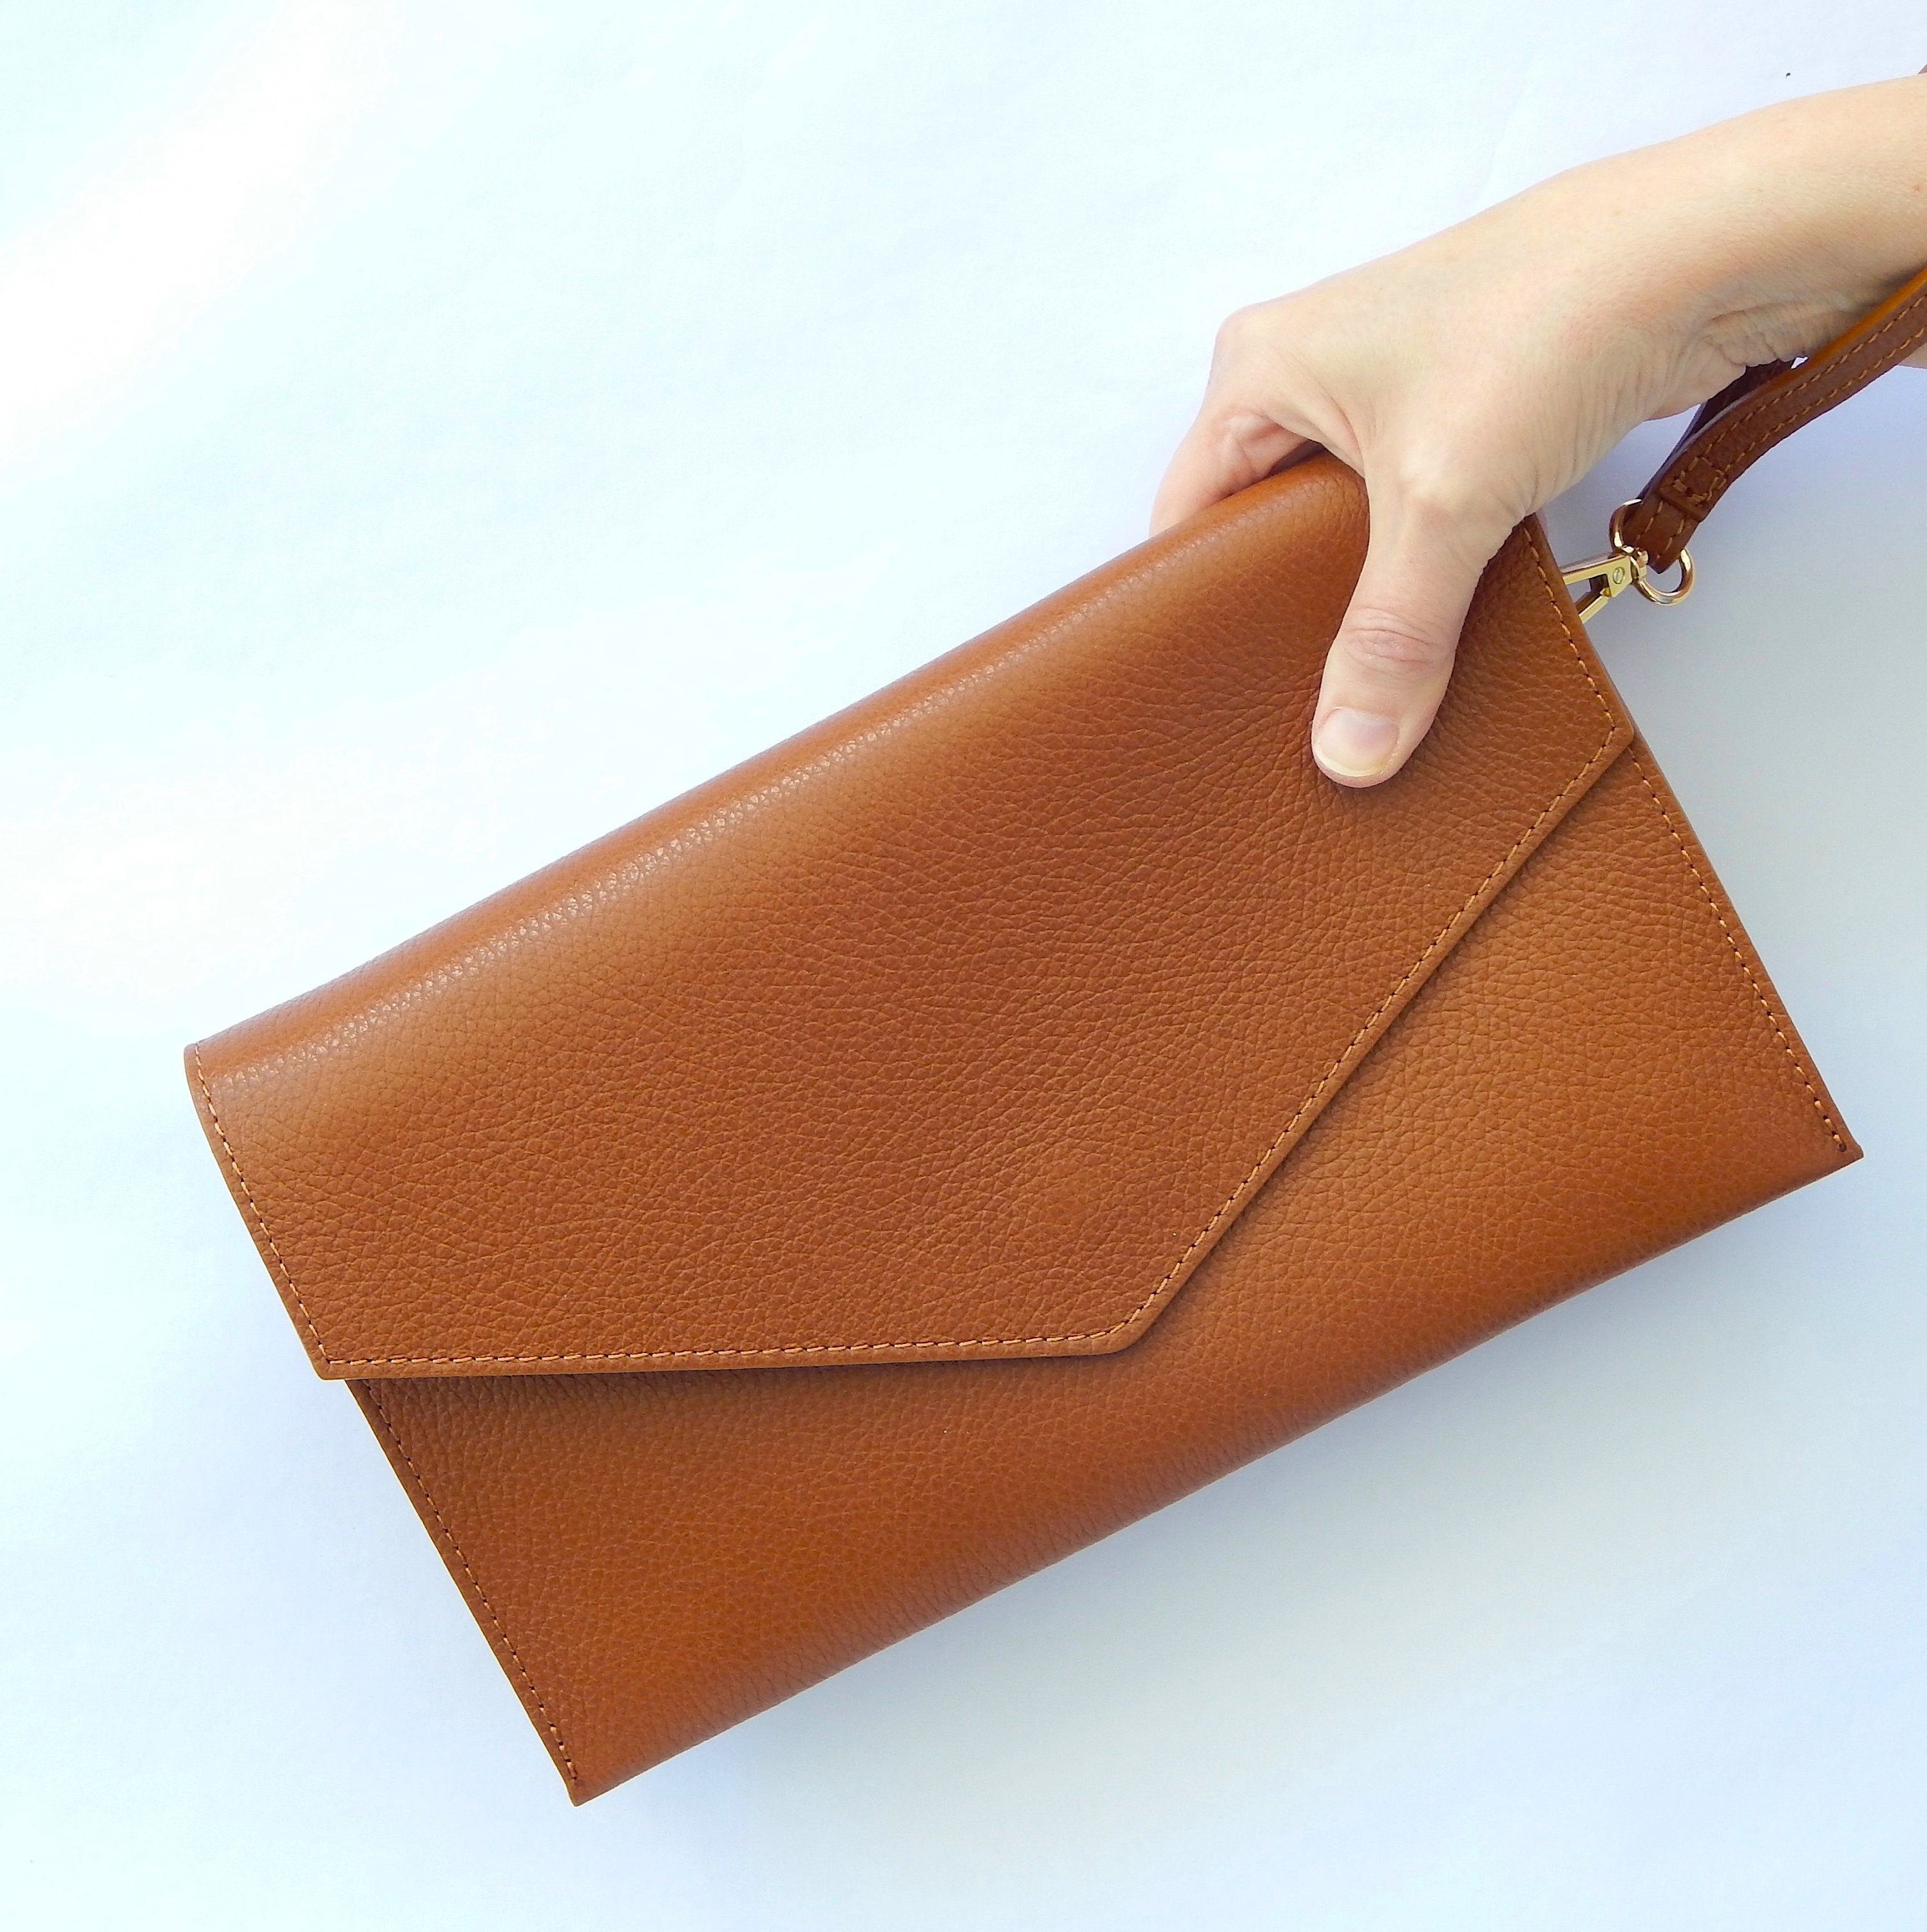 Designer Styled Clutch Bag - 100% Authentic Goat Hide Envelope Style Clutch Bag - Hand Crafted from Argentina - Naty-Z/GH on Sale